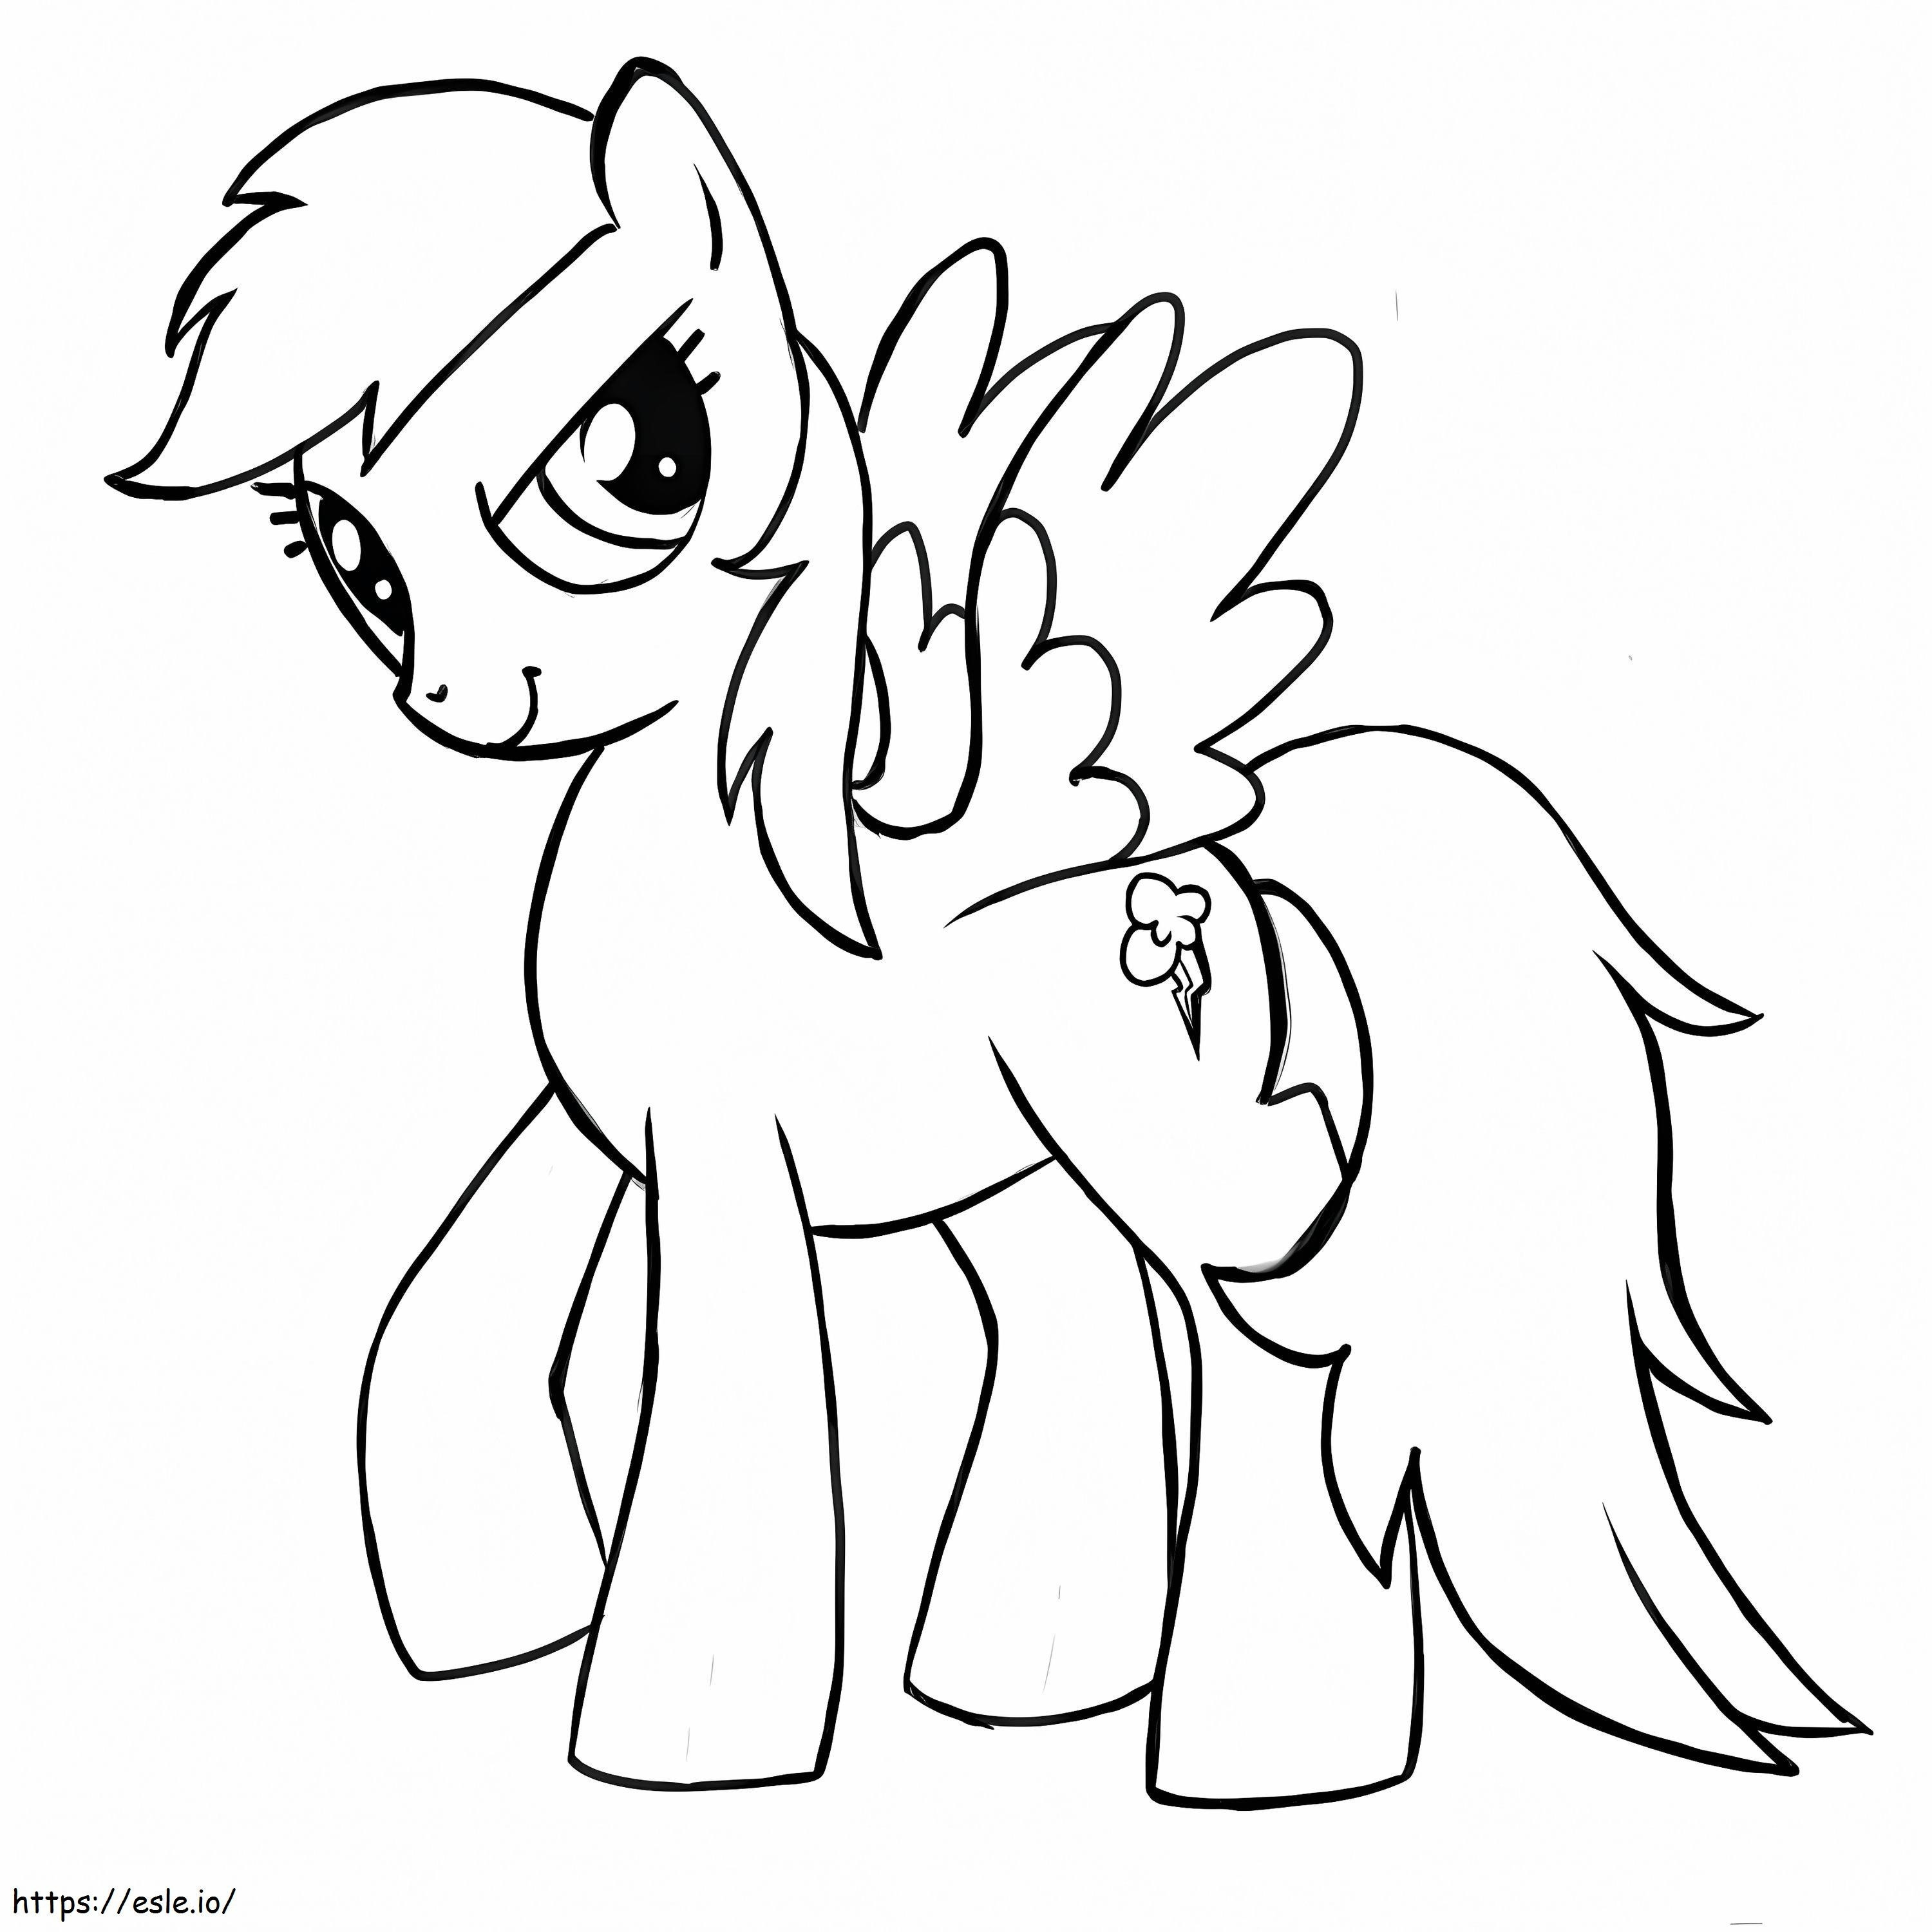 Awesome Rainbow Dash coloring page